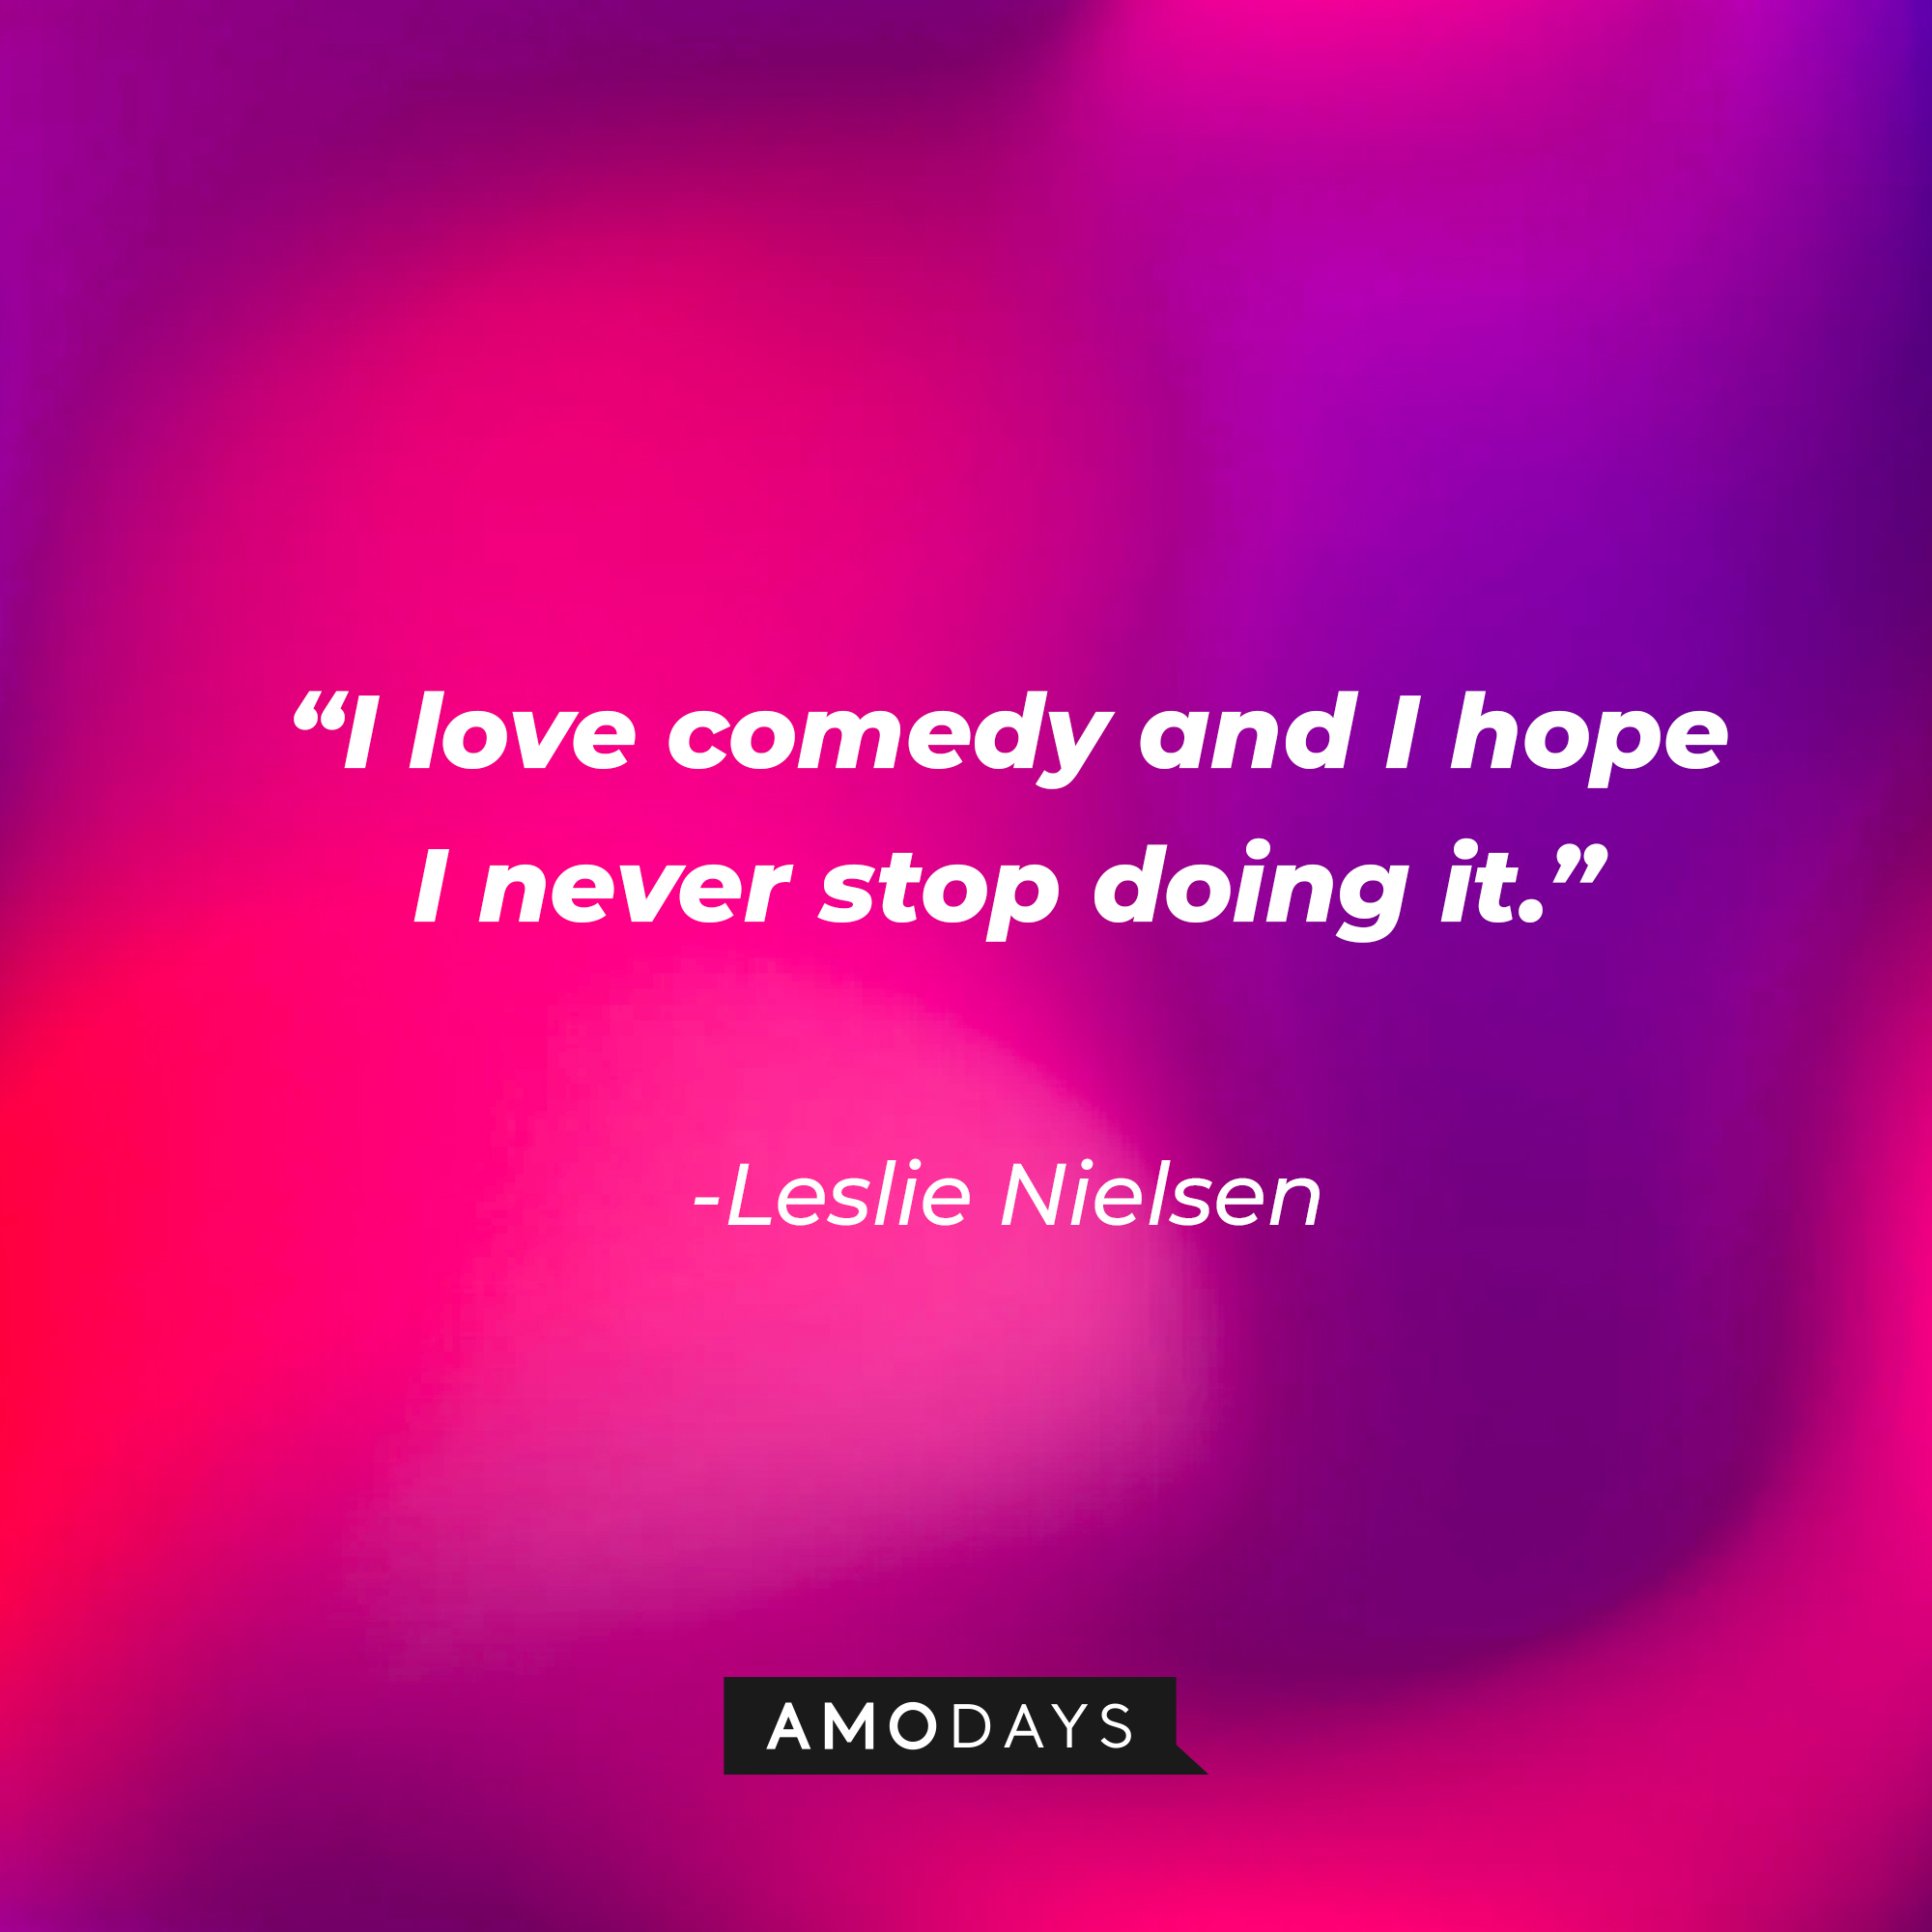 Leslie Nielsen's quote: "I love comedy and I hope I never stop doing it." | Source: Amodays